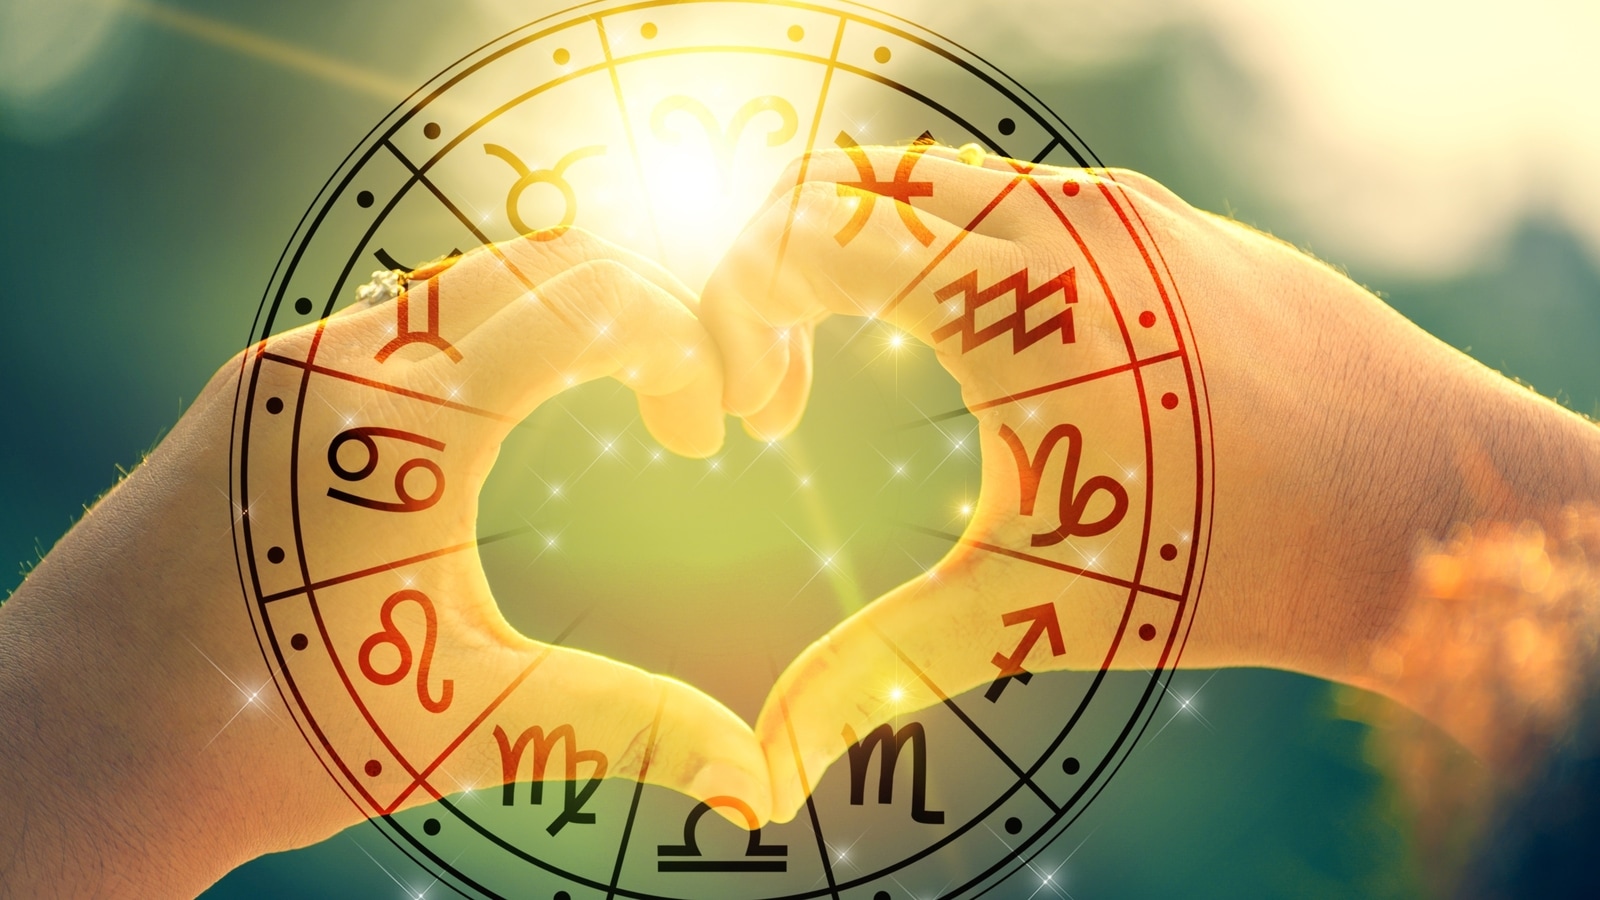 Relationship Astrology: Understand Your Love Life Based on Your Natal